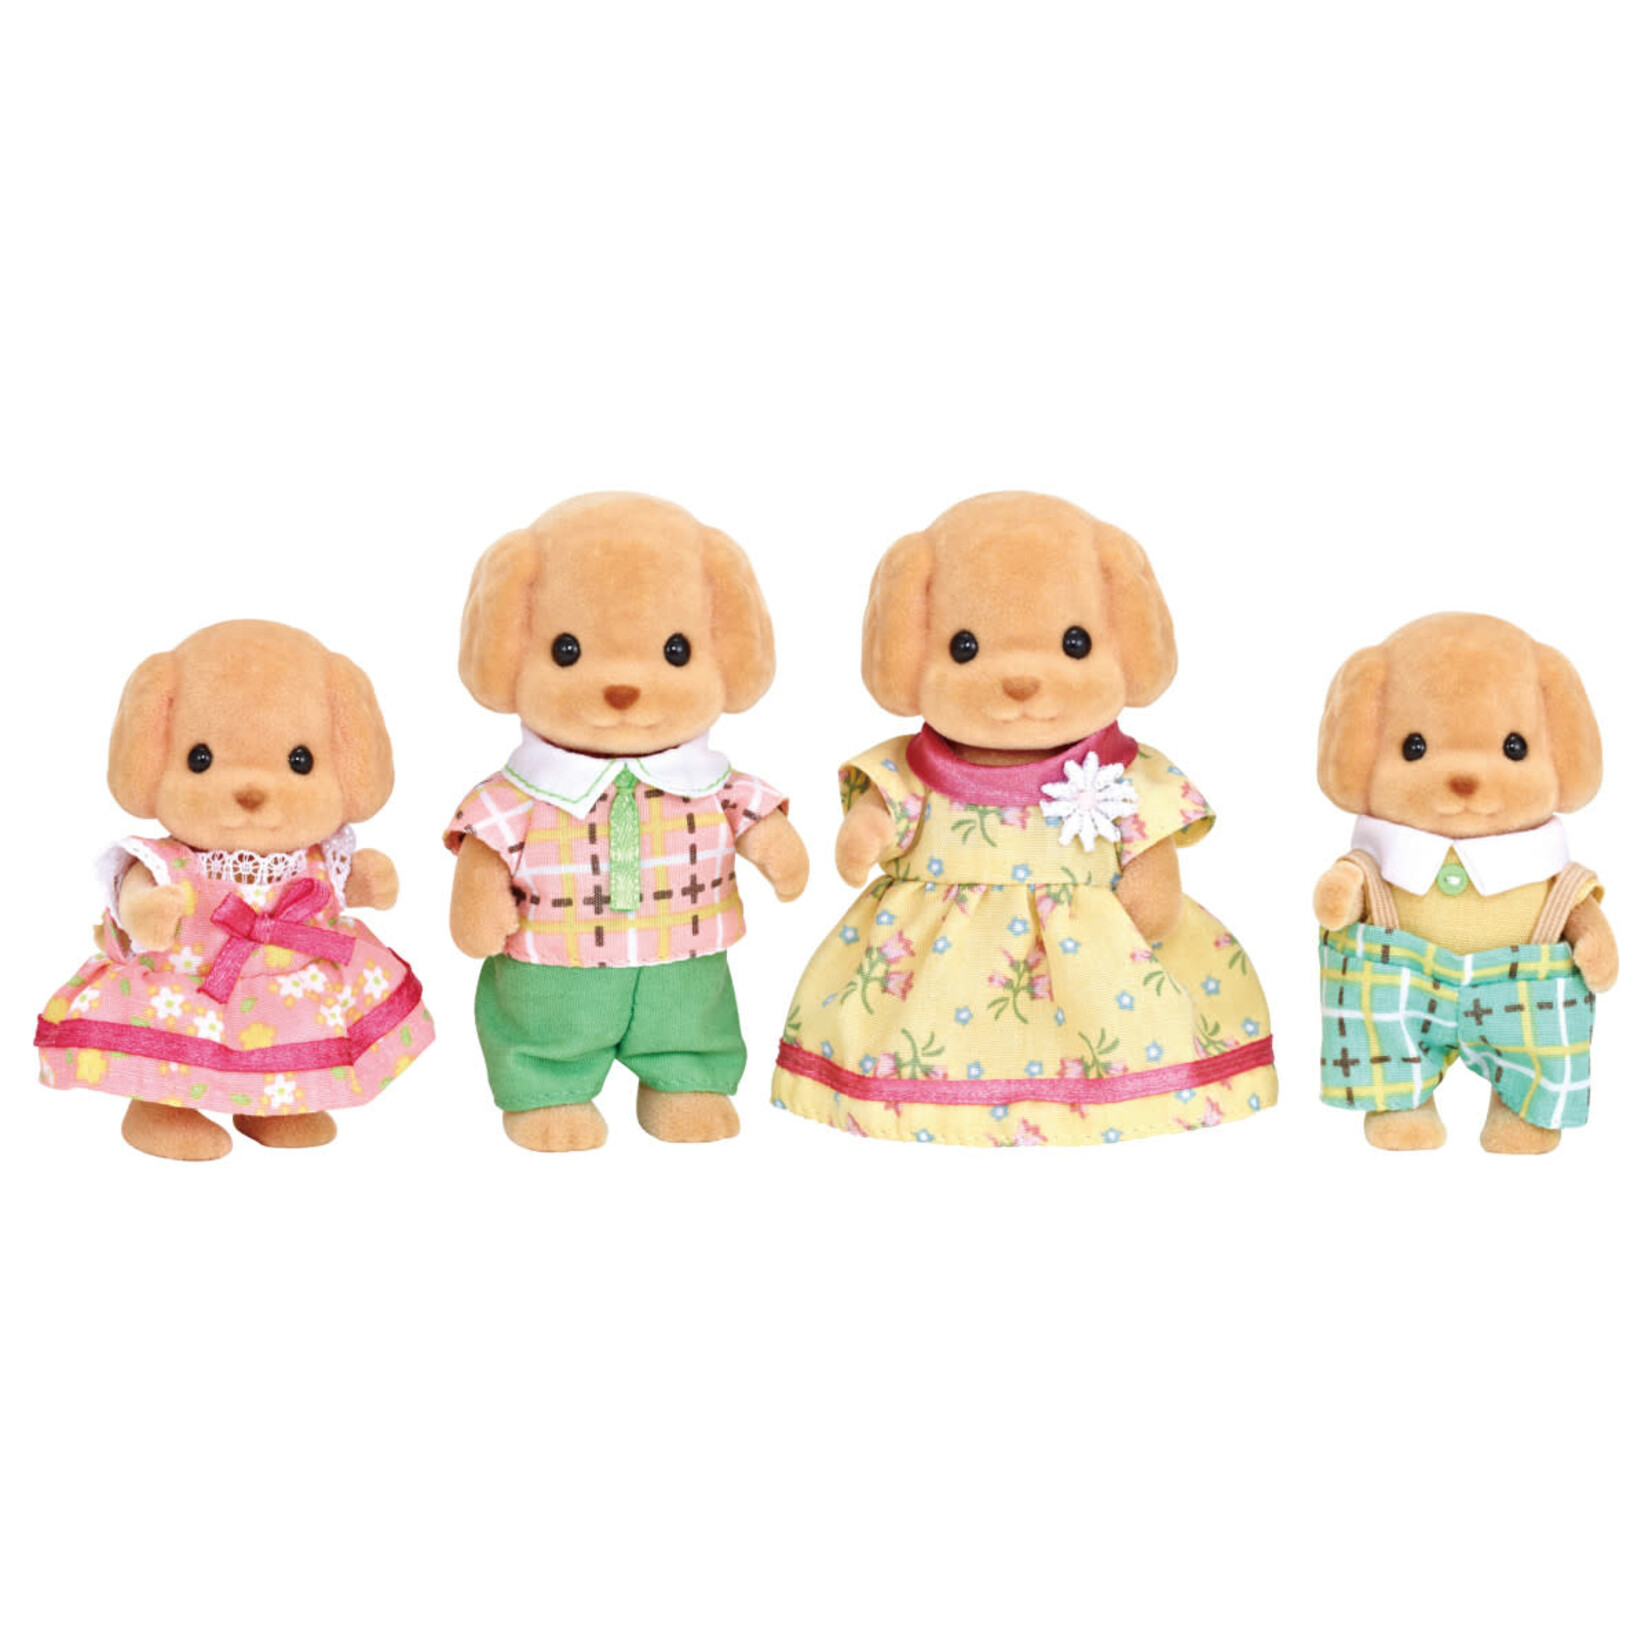 Calico Critters Calico Critters Toy Poodle Family Set